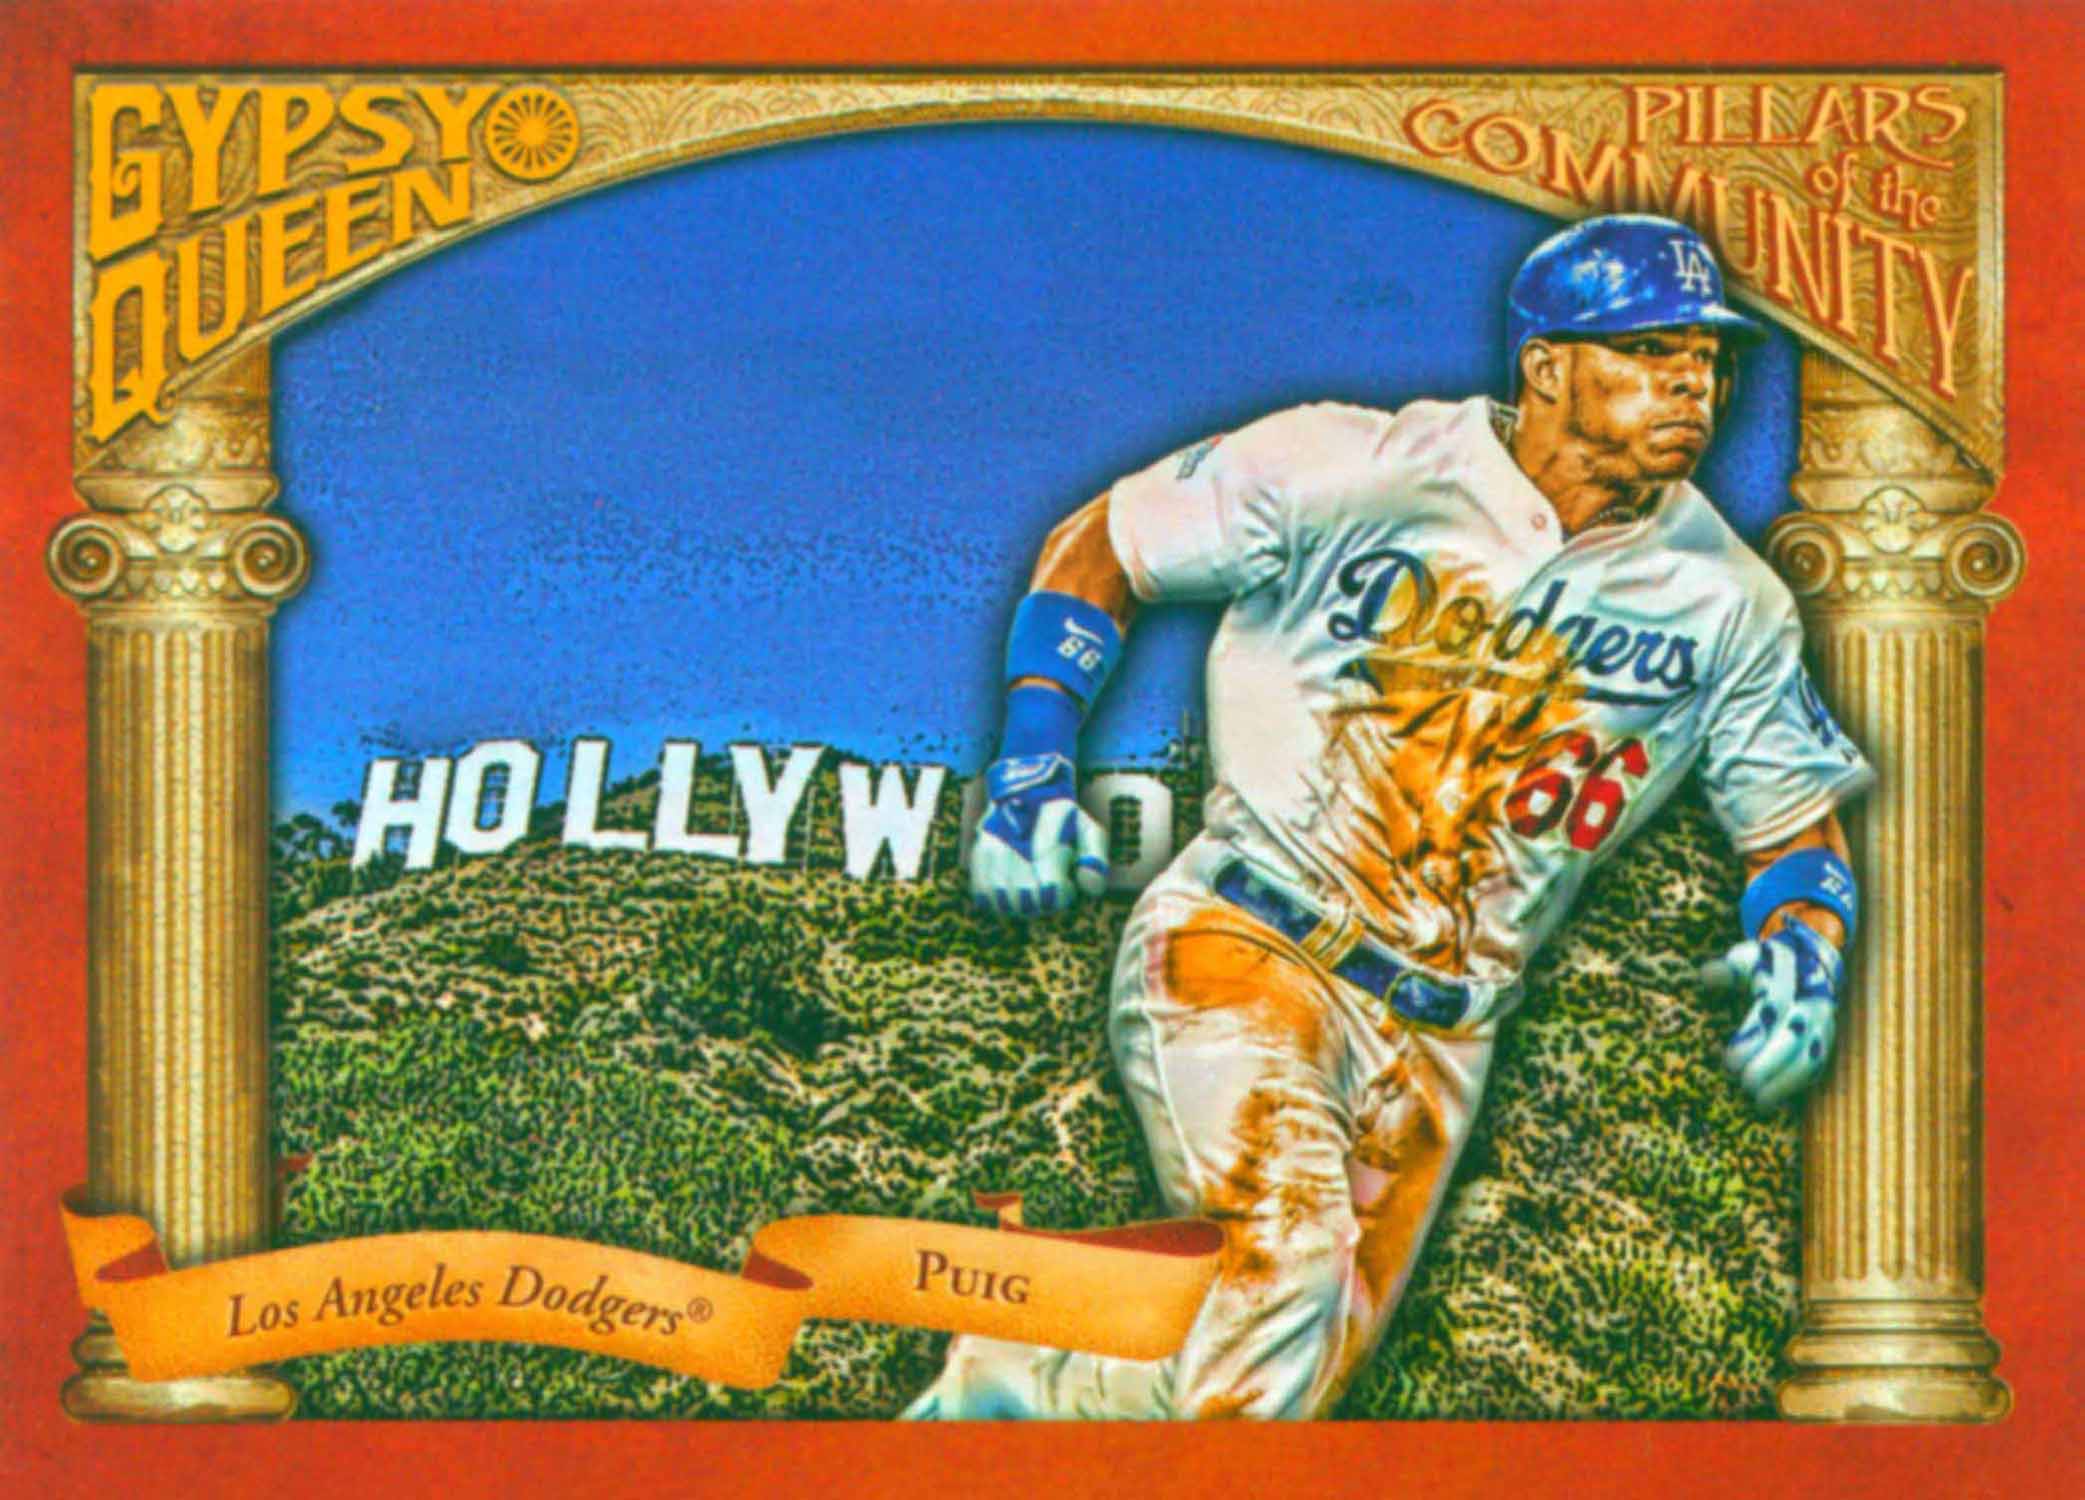 2015 Topps Gypsy Queen Pillars of the Community